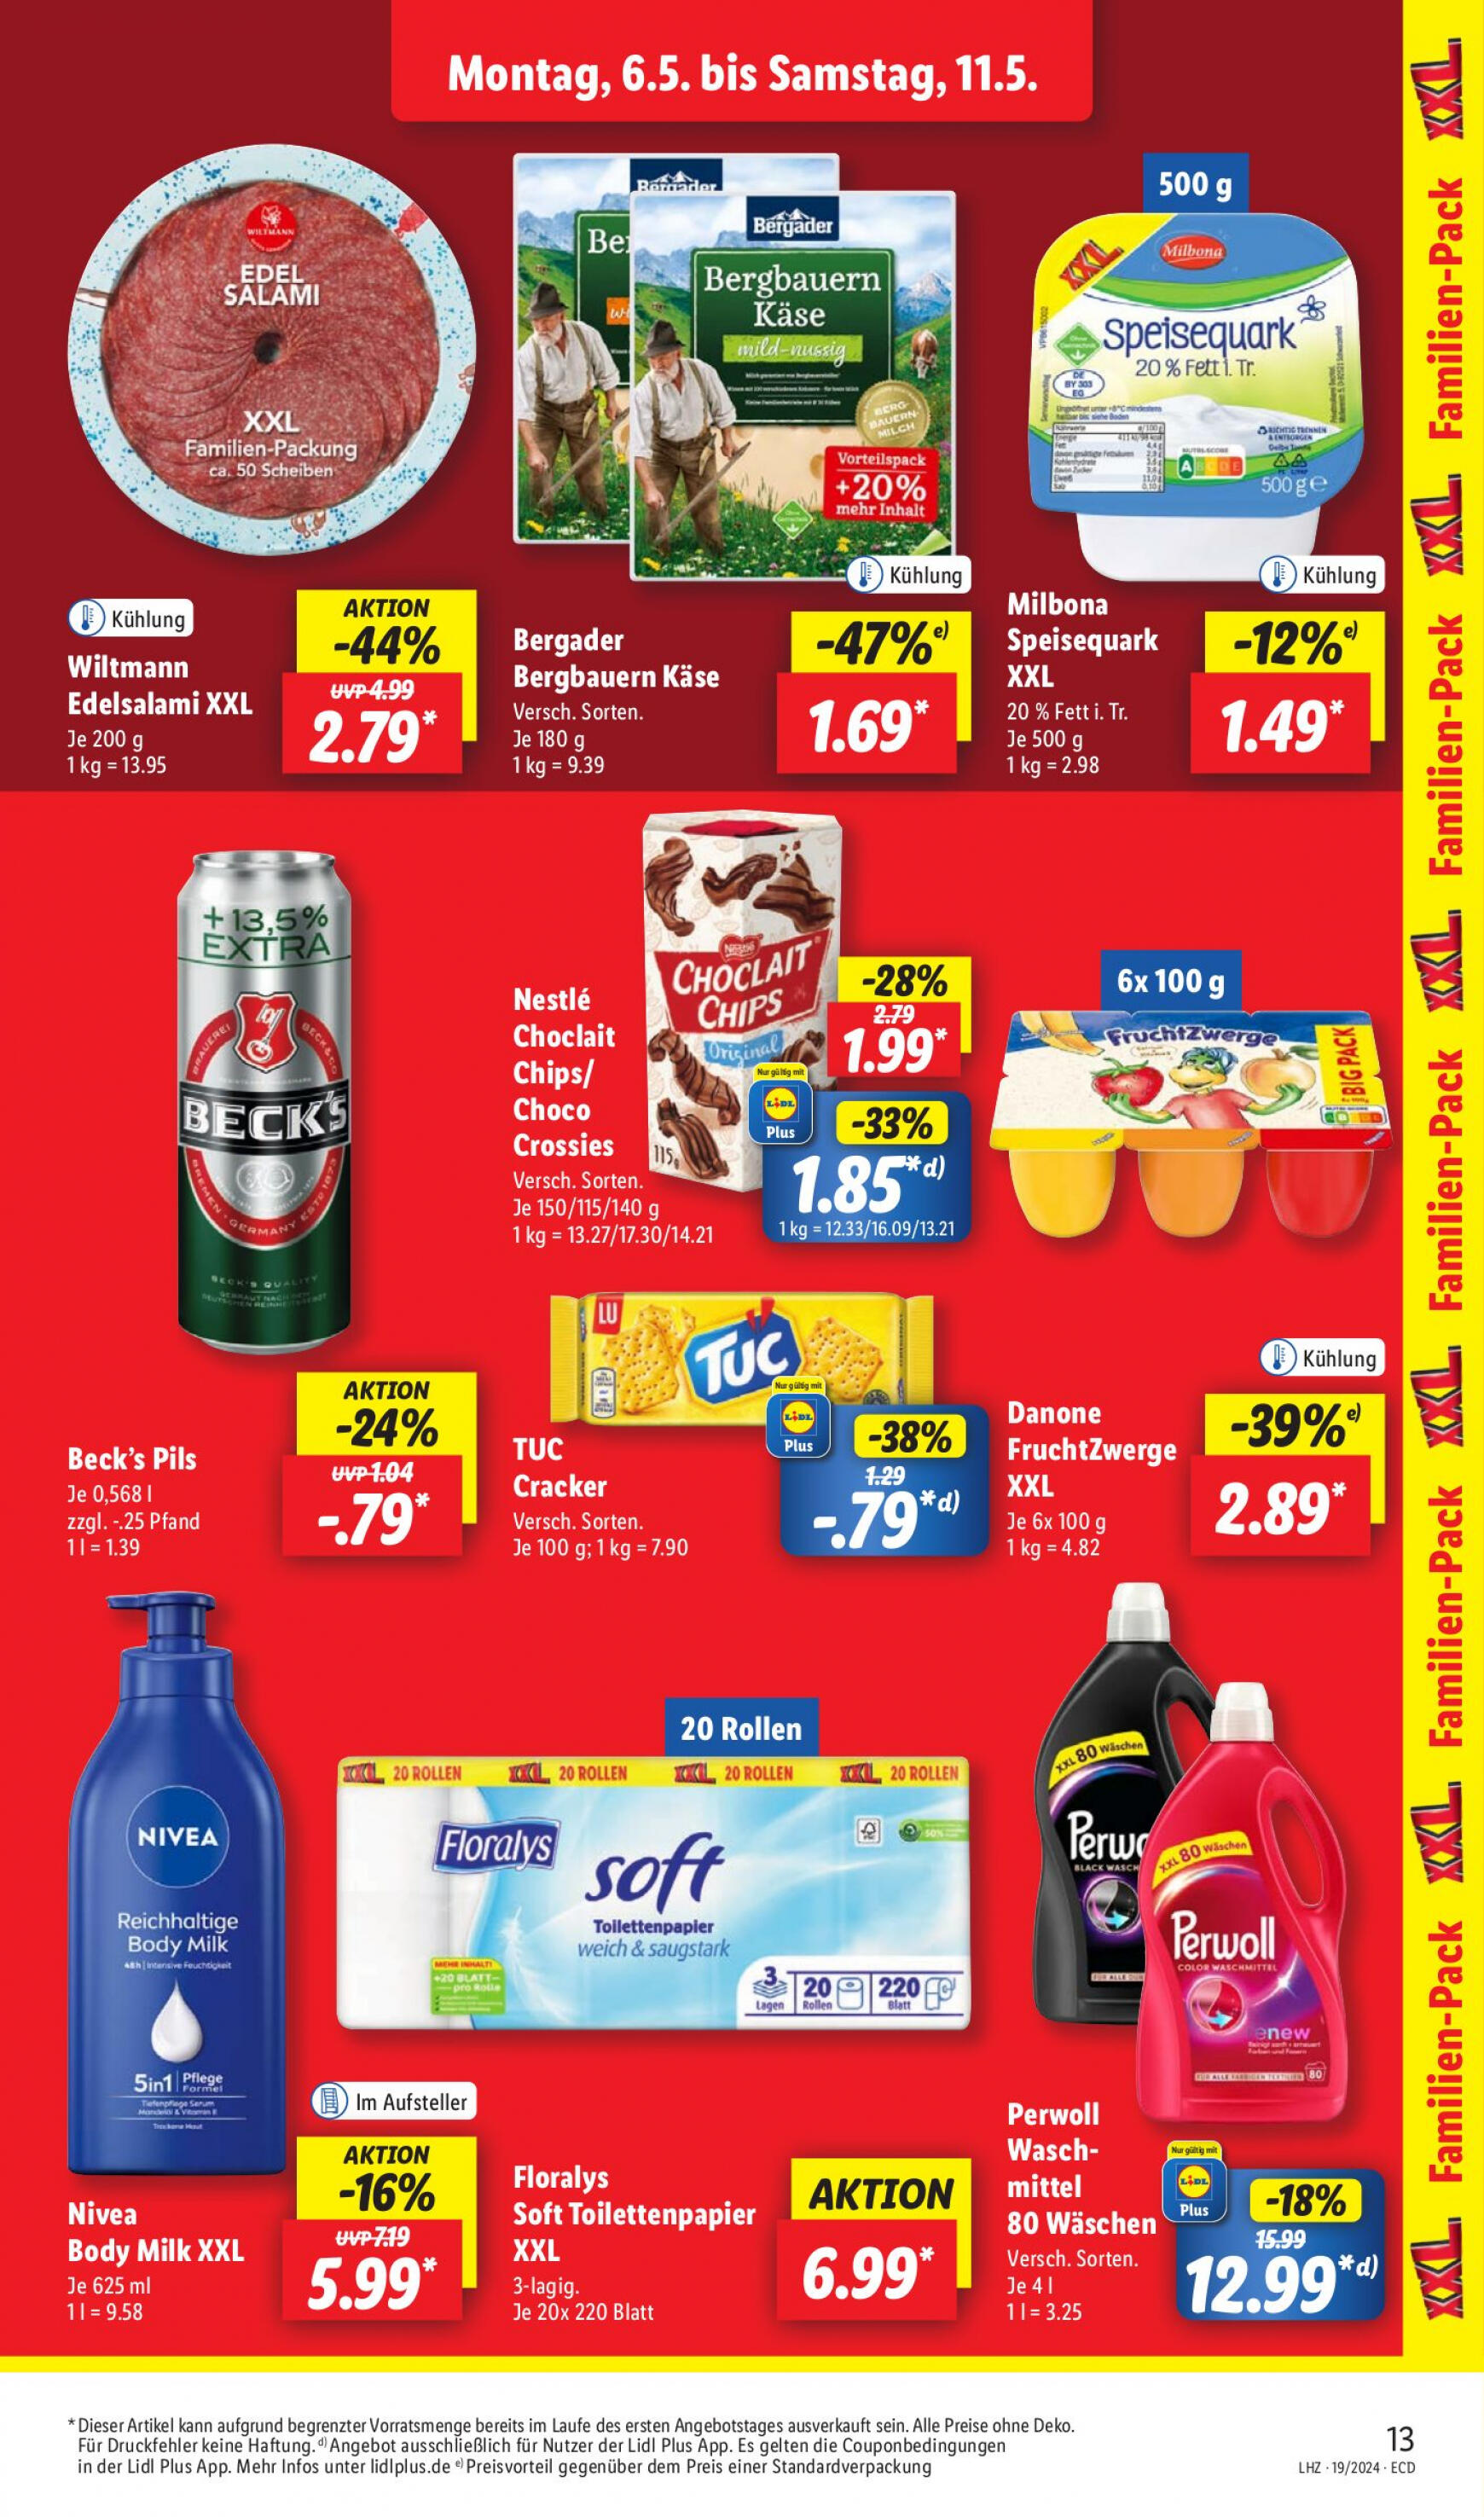 lidl - Flyer Lidl aktuell 06.05. - 11.05. - page: 15